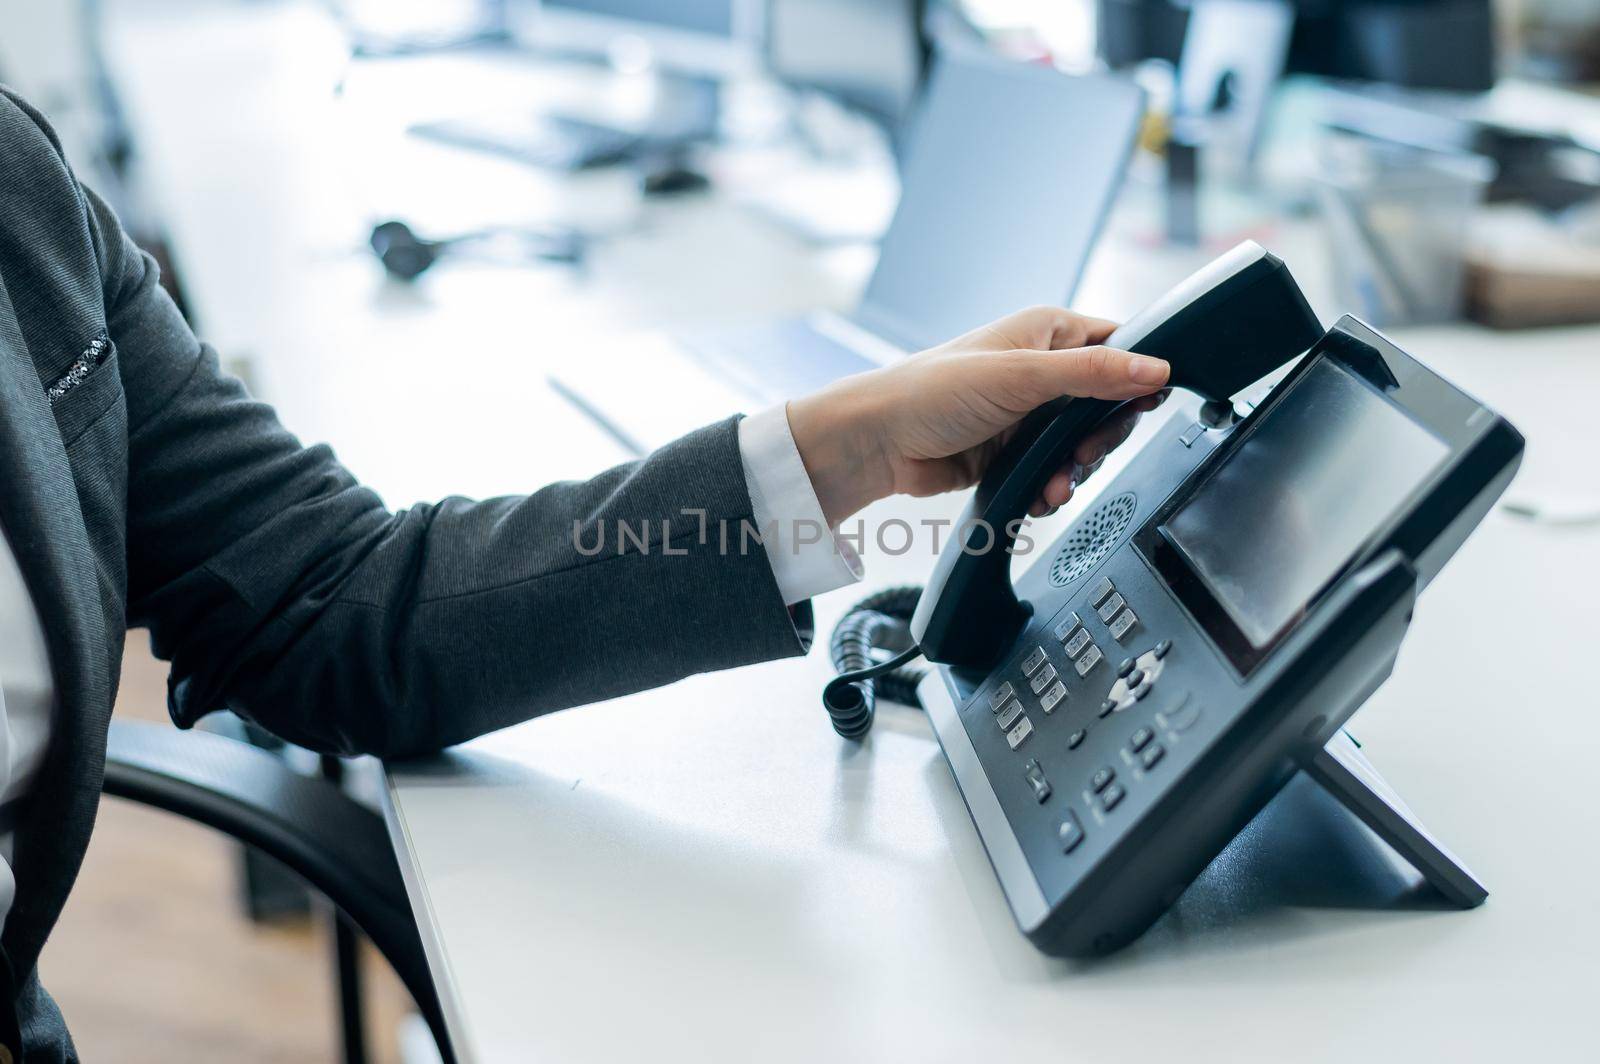 Closeup female hand on landline phone in office. Faceless woman in a suit works as a receptionist answering the phone to customer calls. by mrwed54